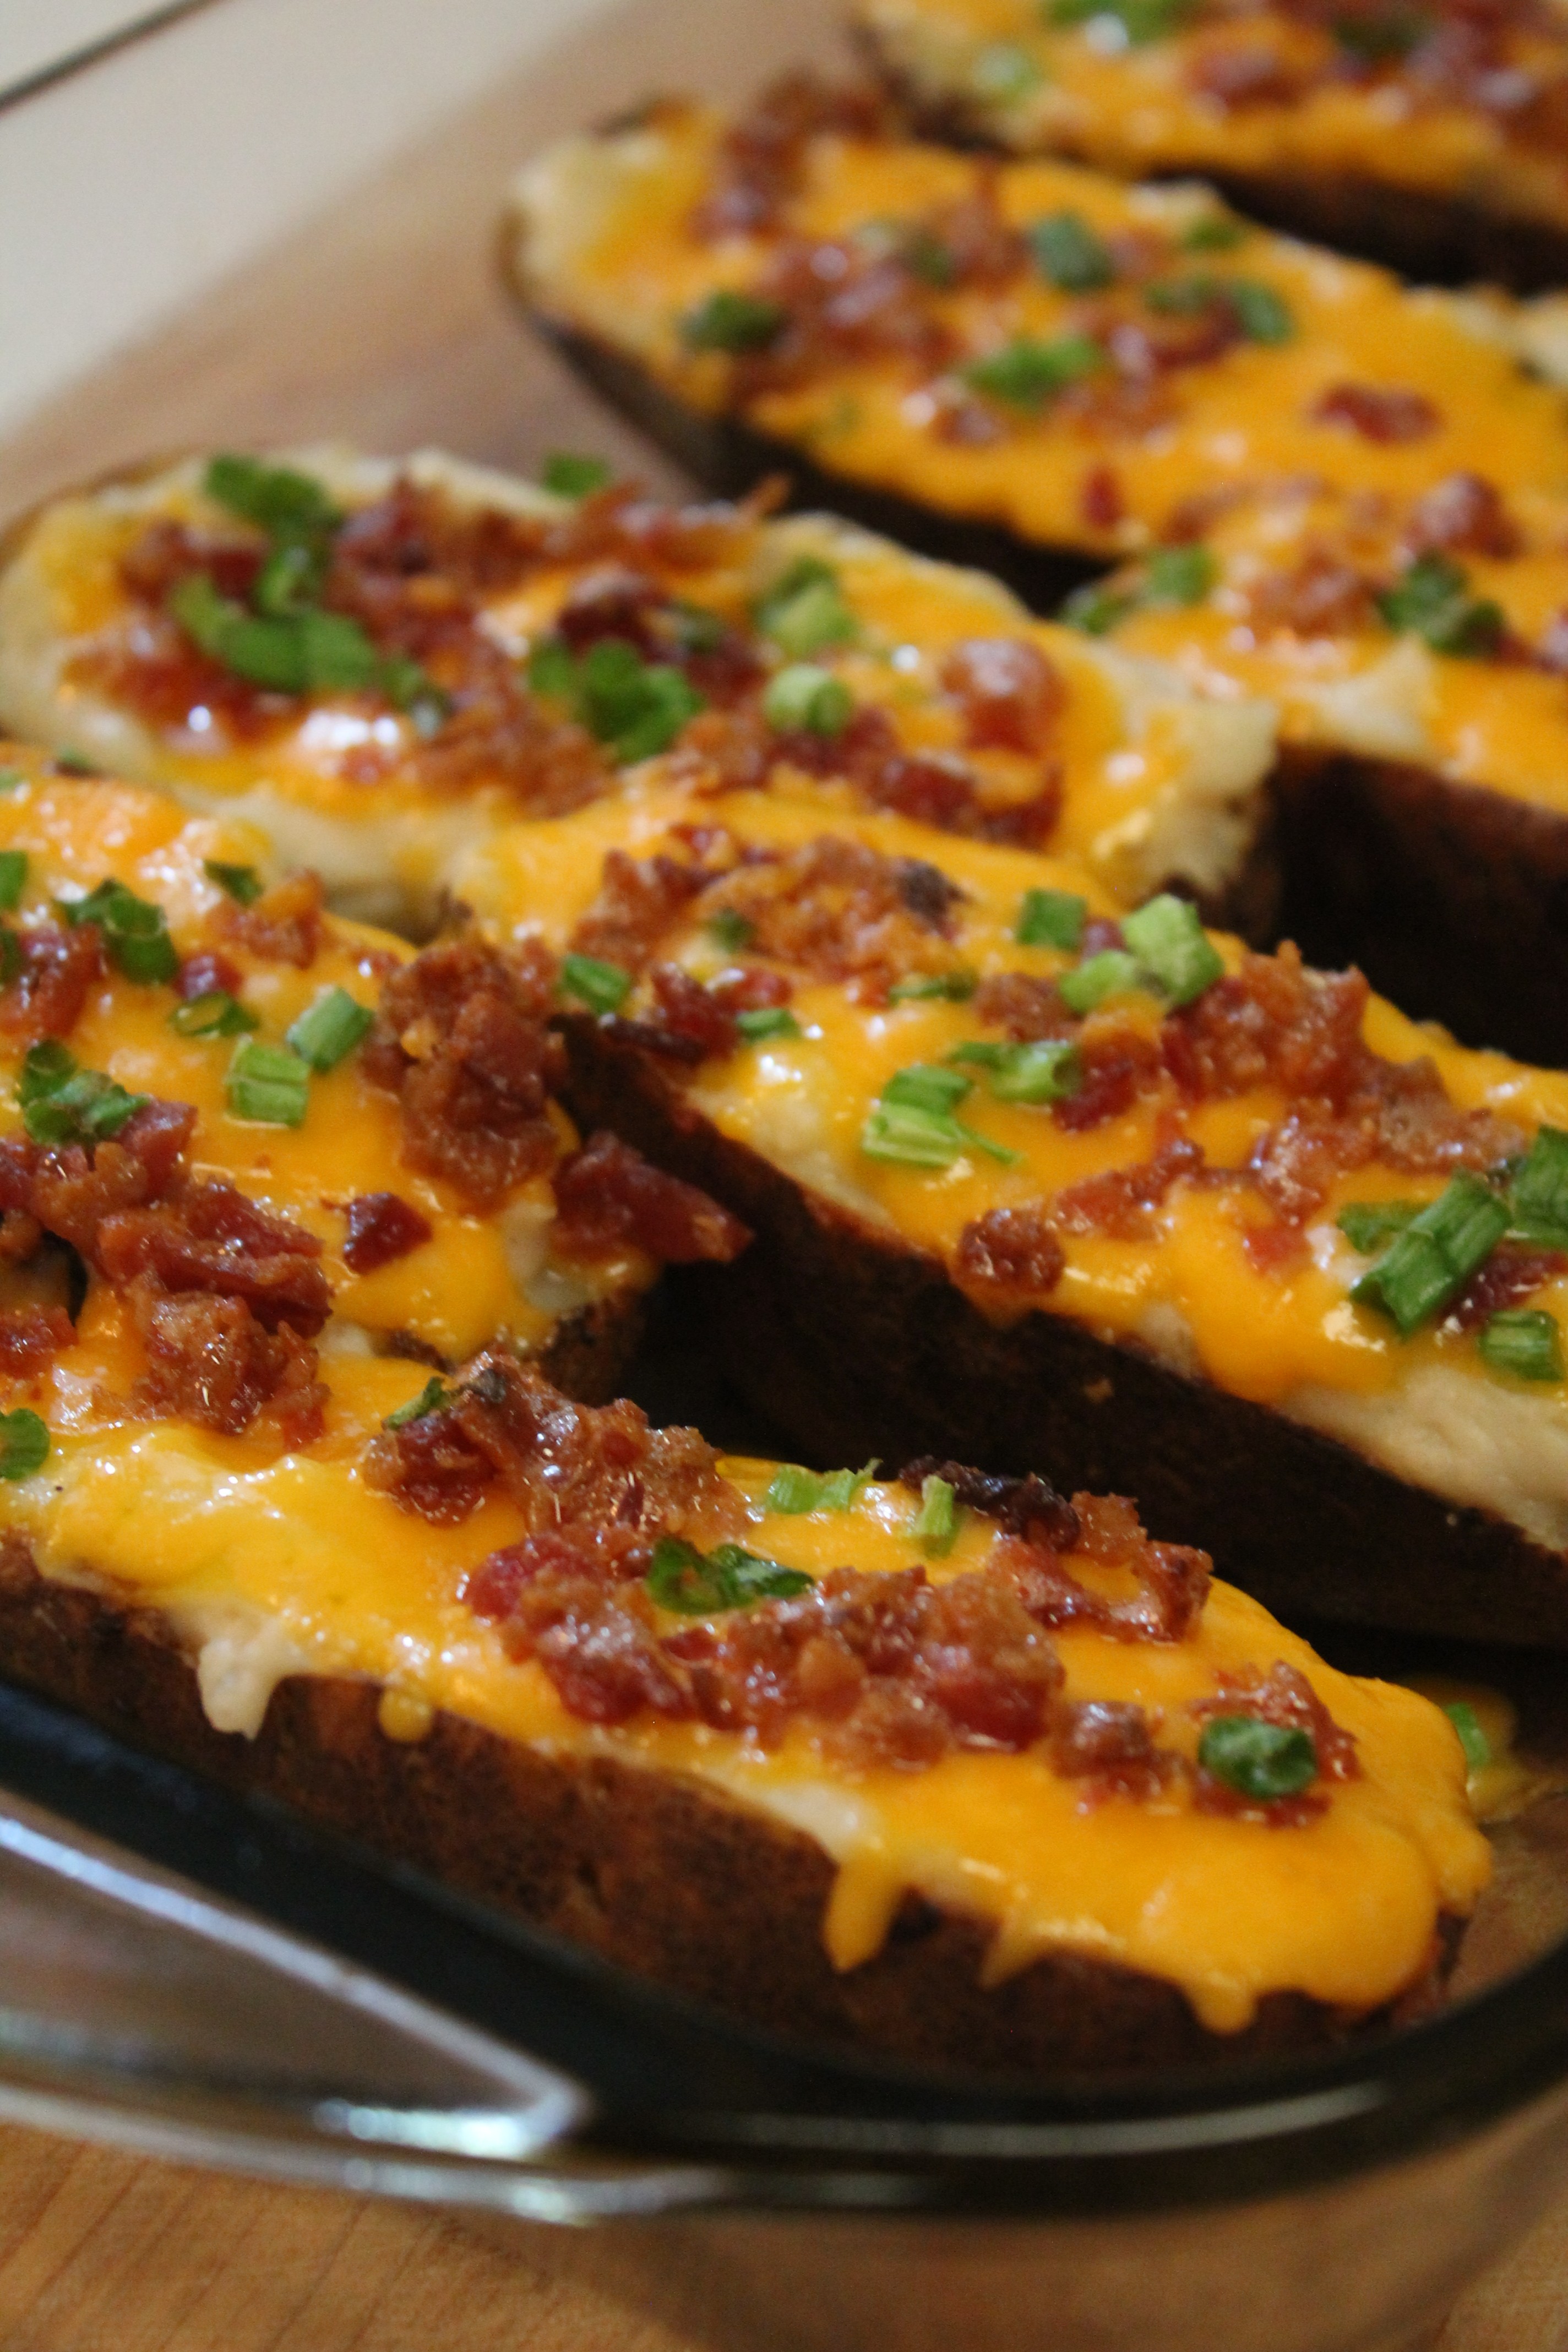 Crispy twice baked potatoes with bacon, cheese and Campbell's Cream of Mushroom soup.